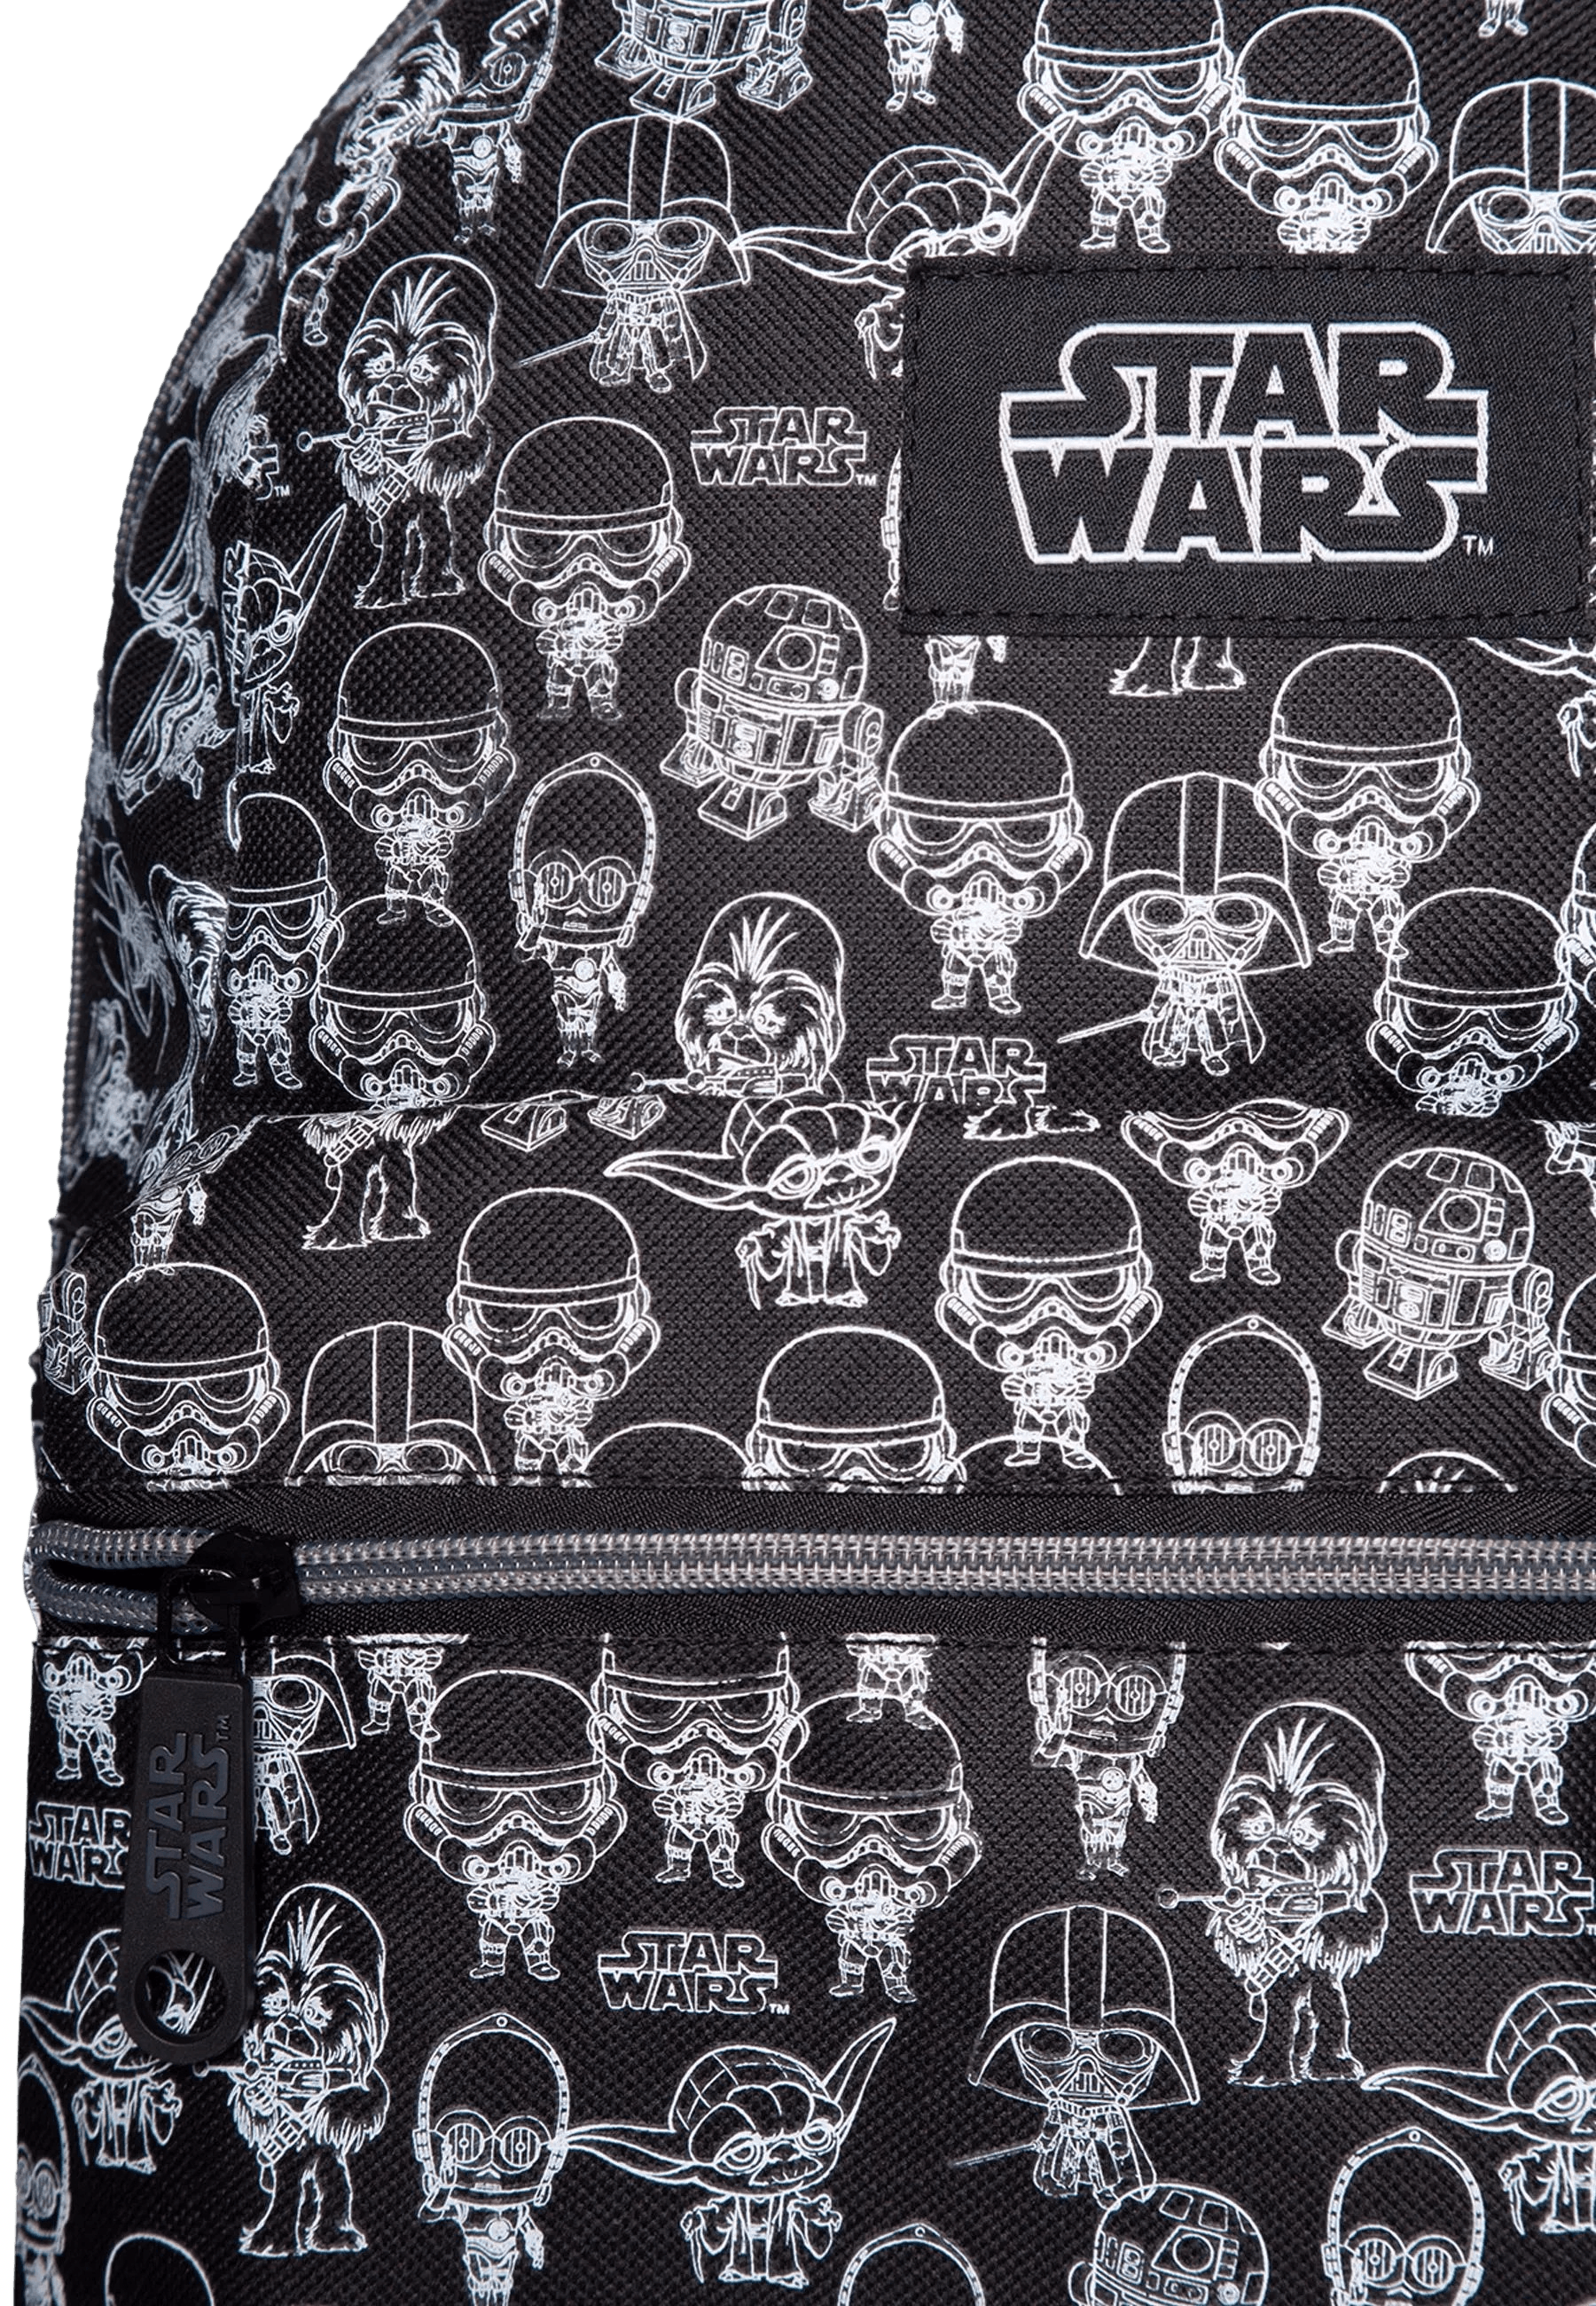 Difuzed - Star Wars - Outline All Over Print Smaller Size Backpack - The Card Vault